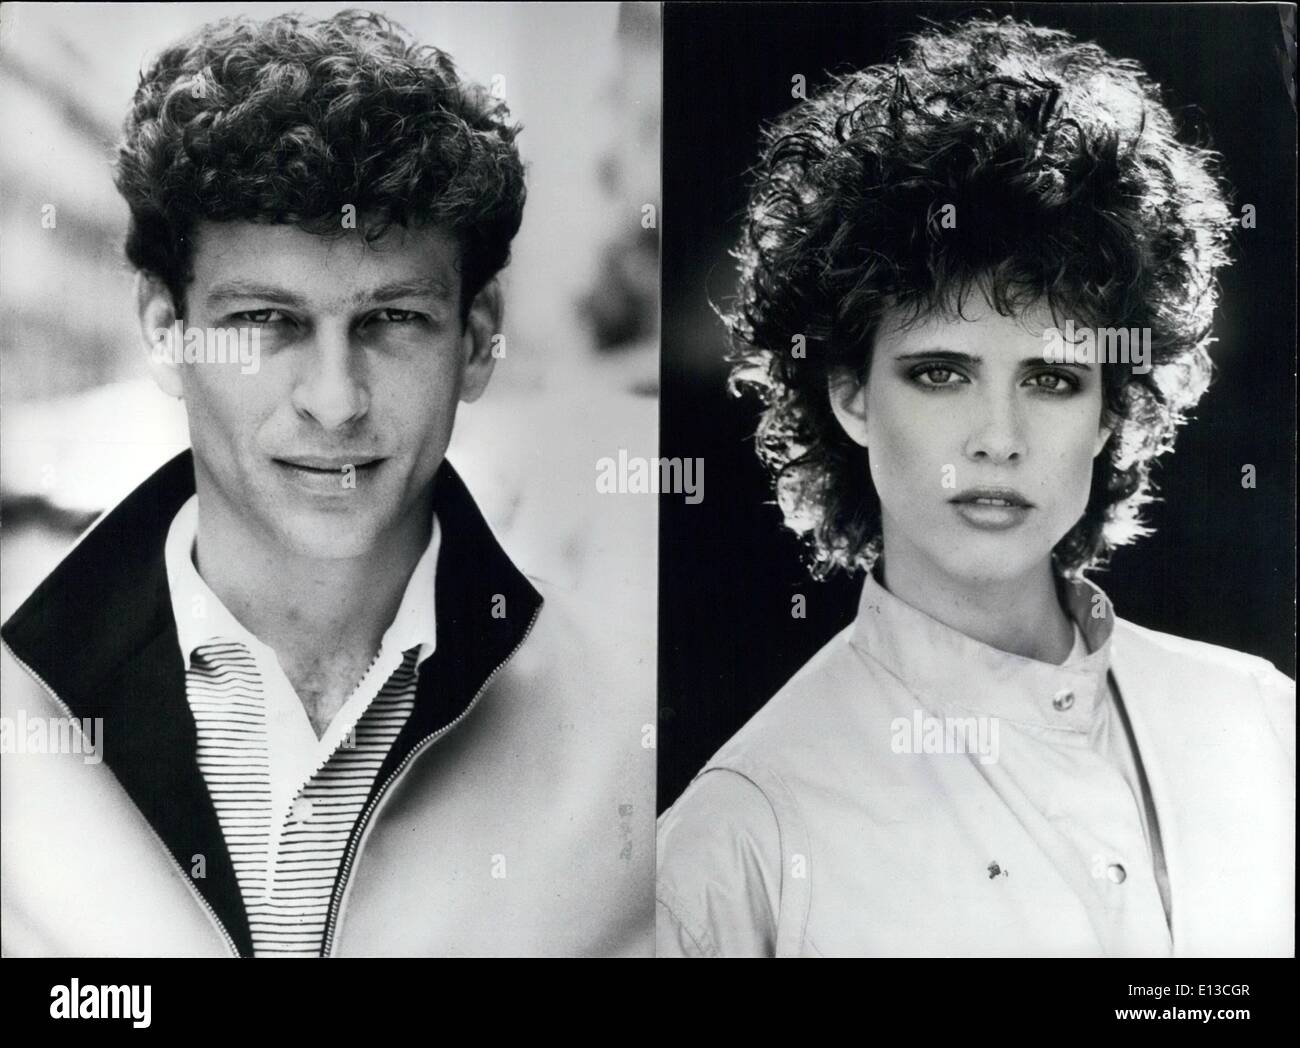 Mar. 02, 2012 - HIS AND HERS ''SCRUFFY'' LOOK. Paris hair stylist, Jean Maro Manistis, has created this informal and untify look for motive men and women. The seemingly disorderly unisex look is held is place with a light perm. Stock Photo